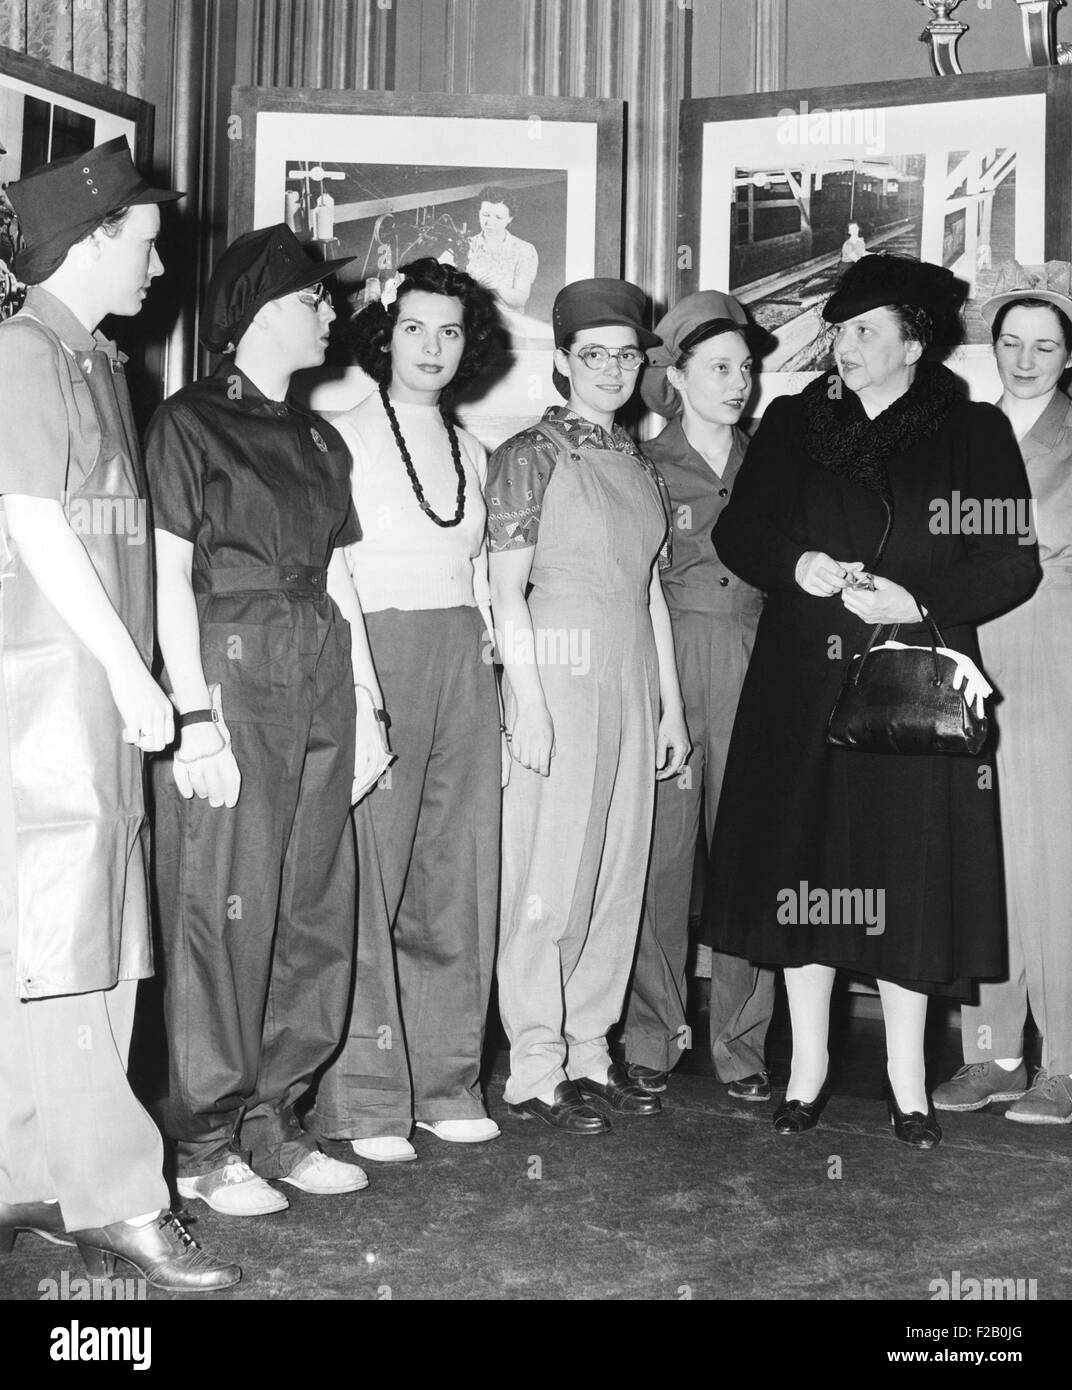 Secretary of Labor Frances Perkins examines work clothes for women. March 1, 1943. The work clothes for women were designed to promote safety and efficiency. The third model from left demonstrated how a female war worker SHOULD NOT be attired, in contrast to approved garb. (CSU 2015 9 1076) Stock Photo